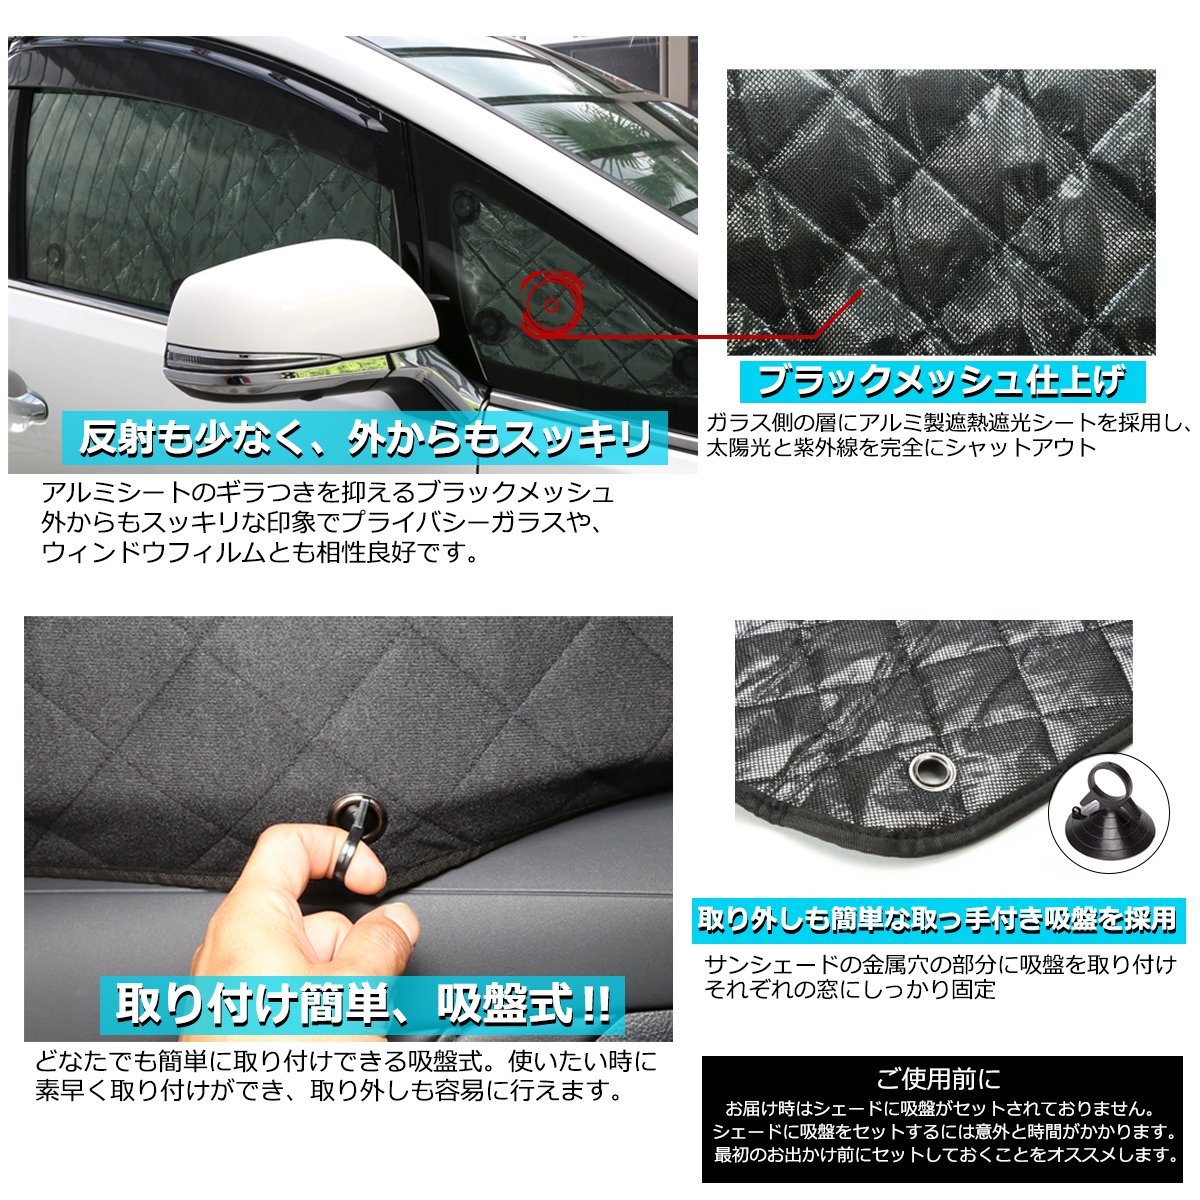 210 series Corolla touring sun shade all for window 5 layer structure black mesh sleeping area in the vehicle outdoor sunshade SZ832